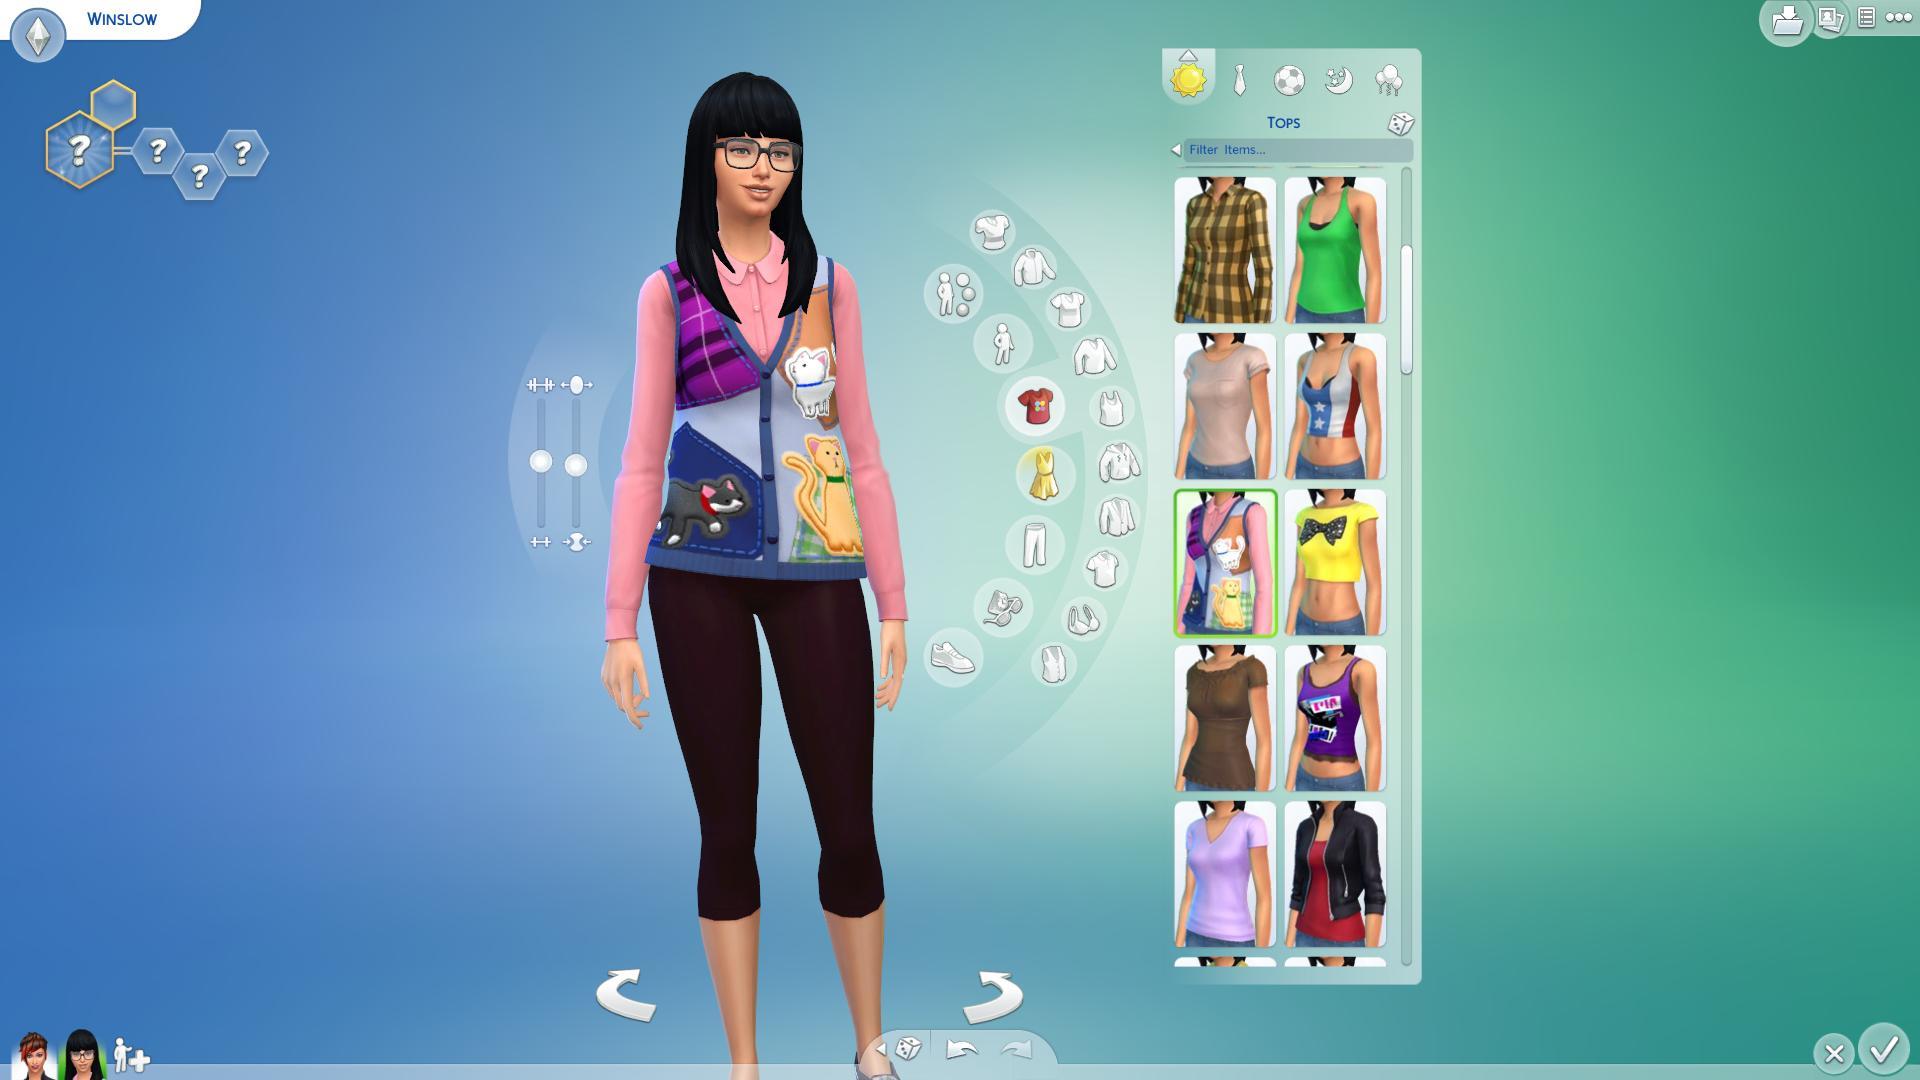 sims 4 apk and data download